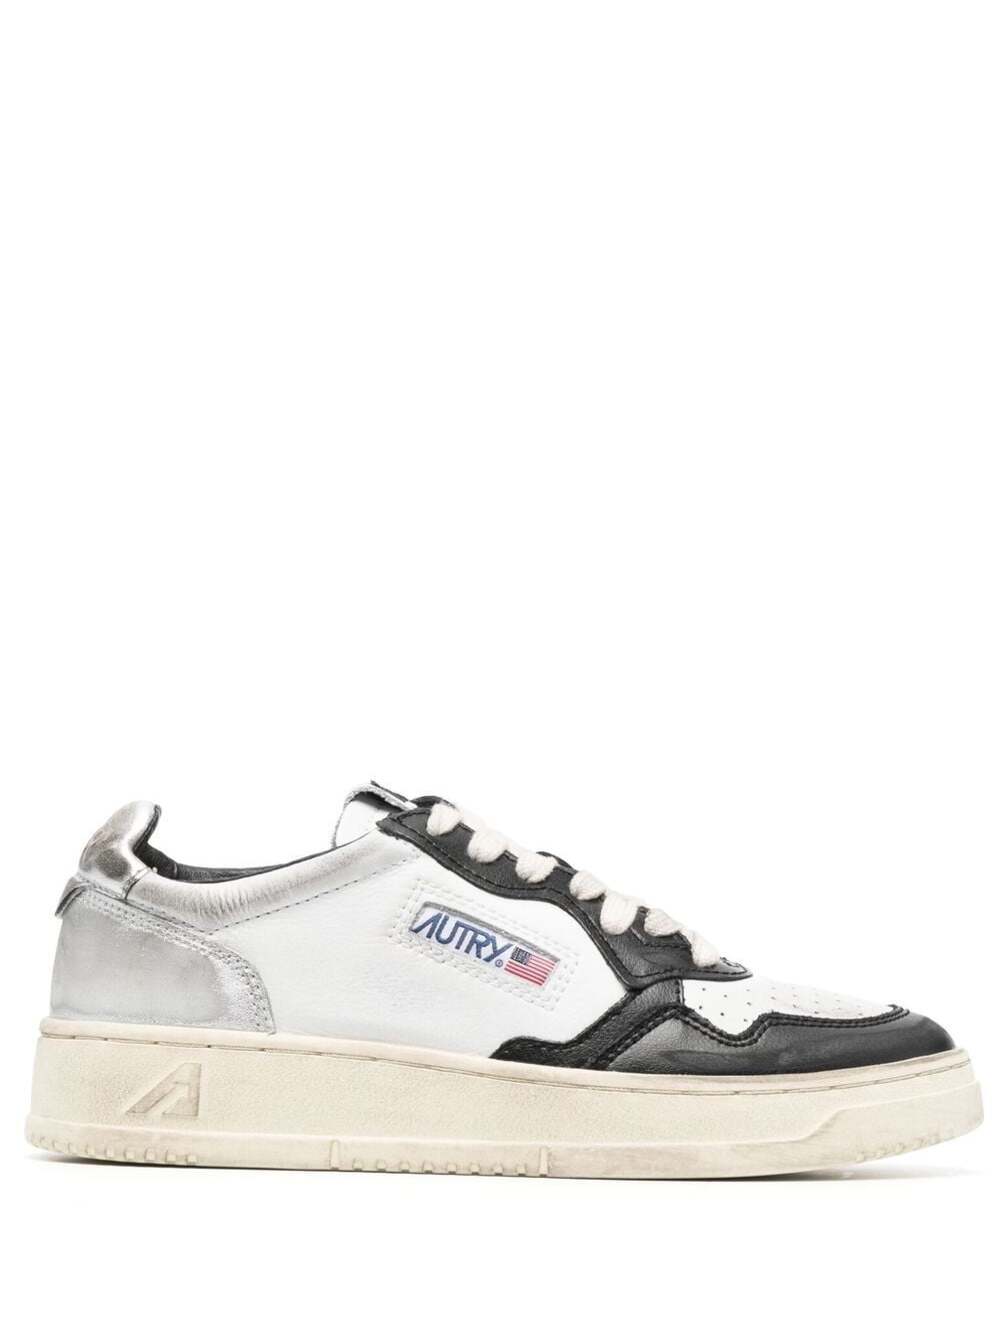 AUTRY BLACK AND WHITE MEDALIST LOW TOP SNEAKERS DISTRESSED EFFECT IN COW LEATHER